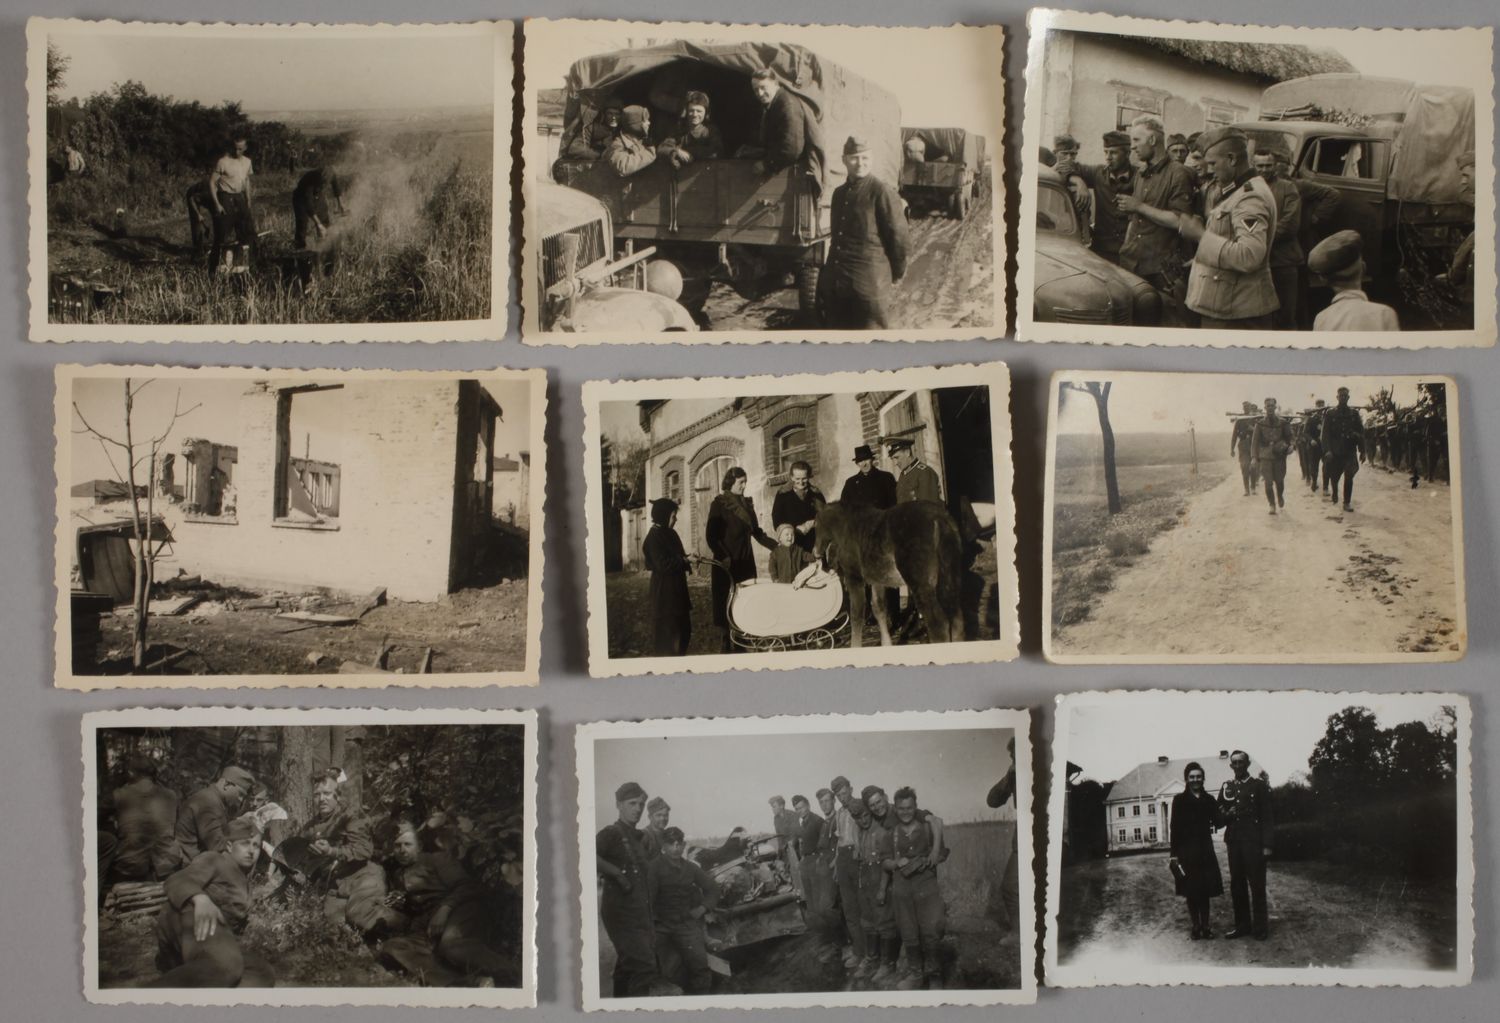 A collection of photos from World War II - Image 16 of 19